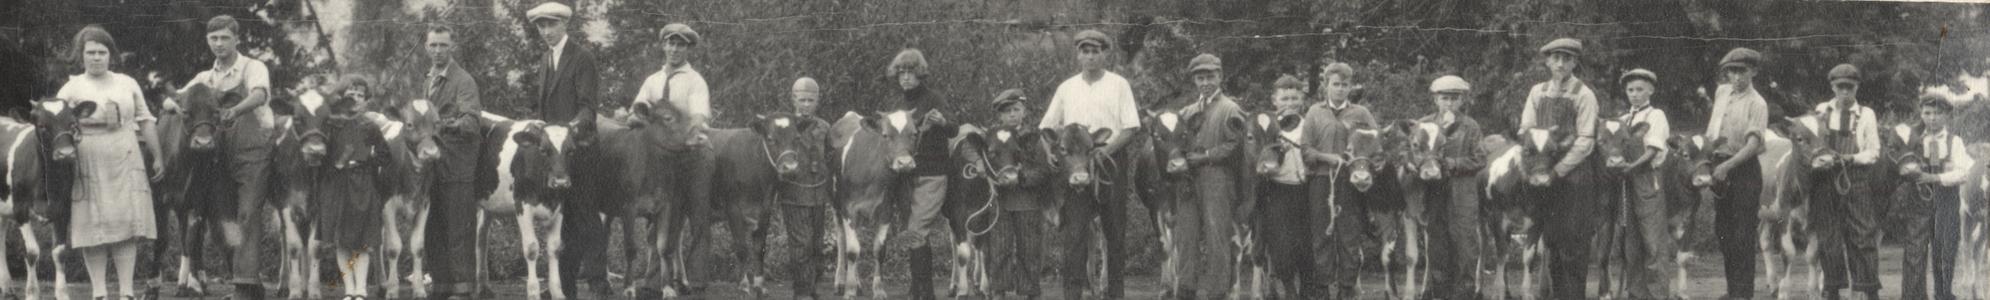 4-H kids with cows